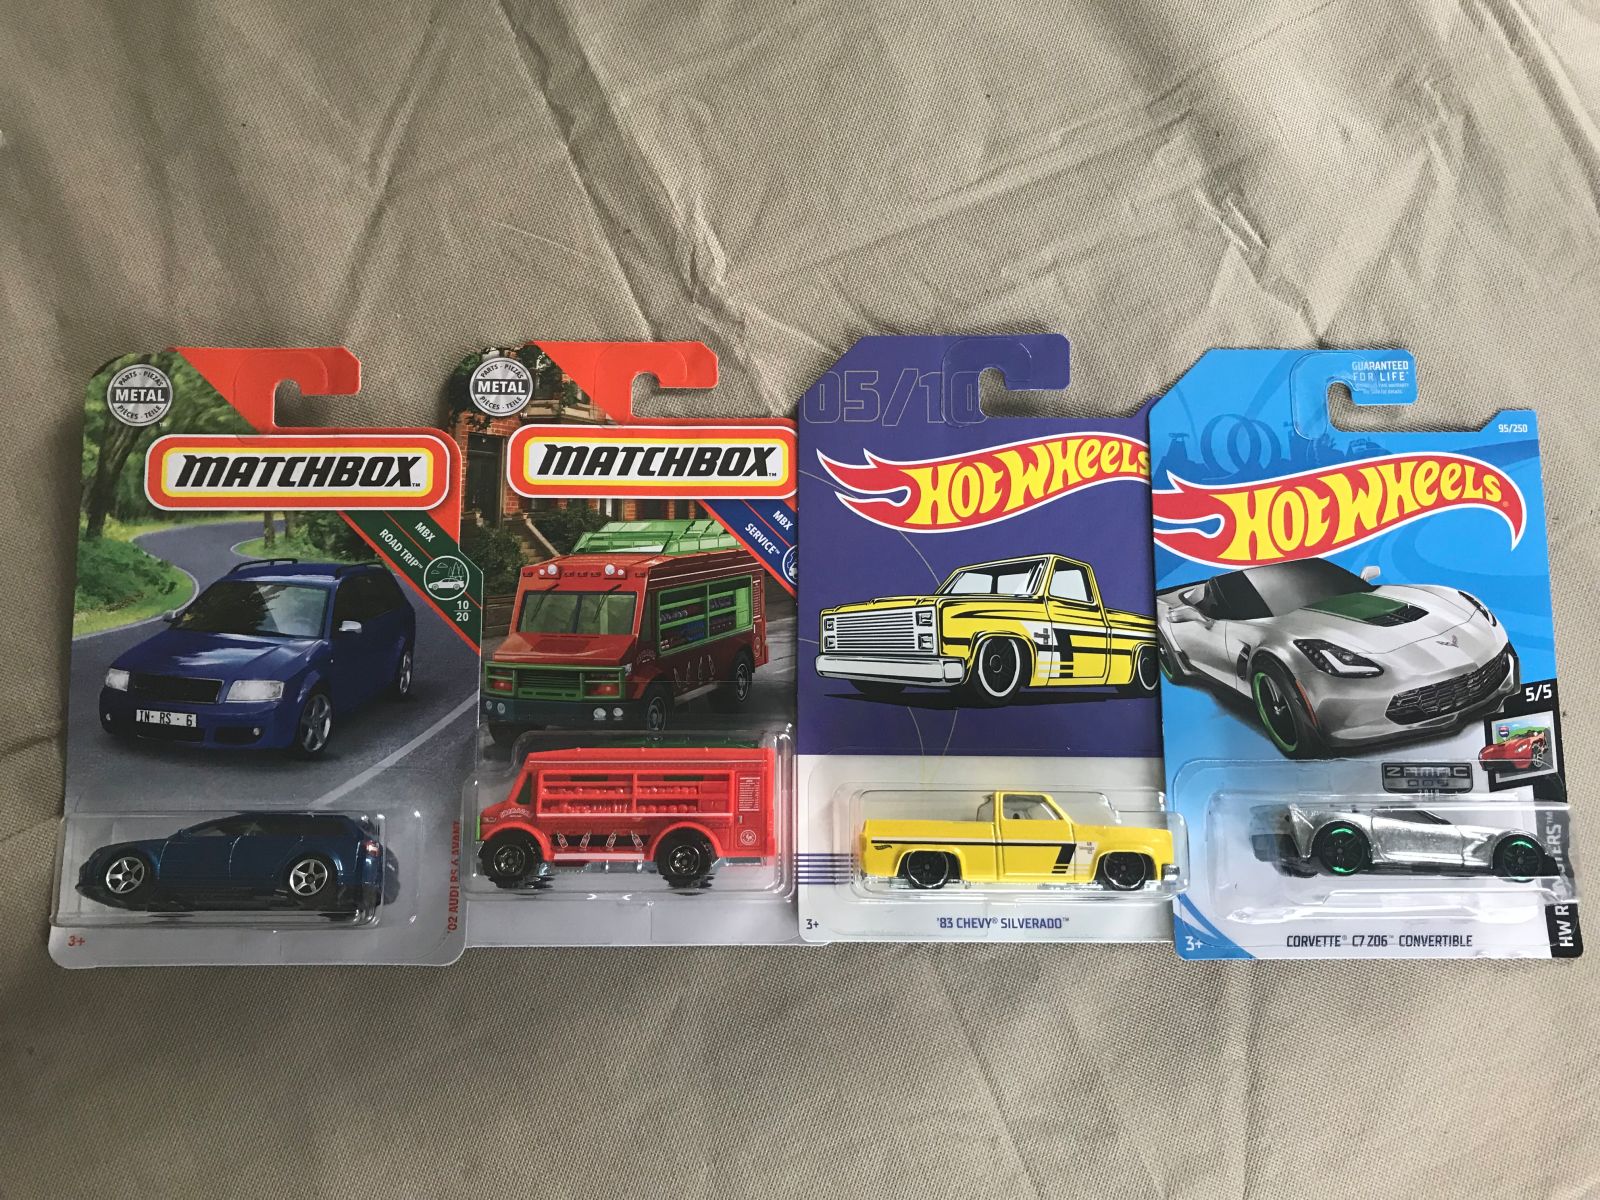 Same cars as first photo...just laid ‘em out better to show the card art.